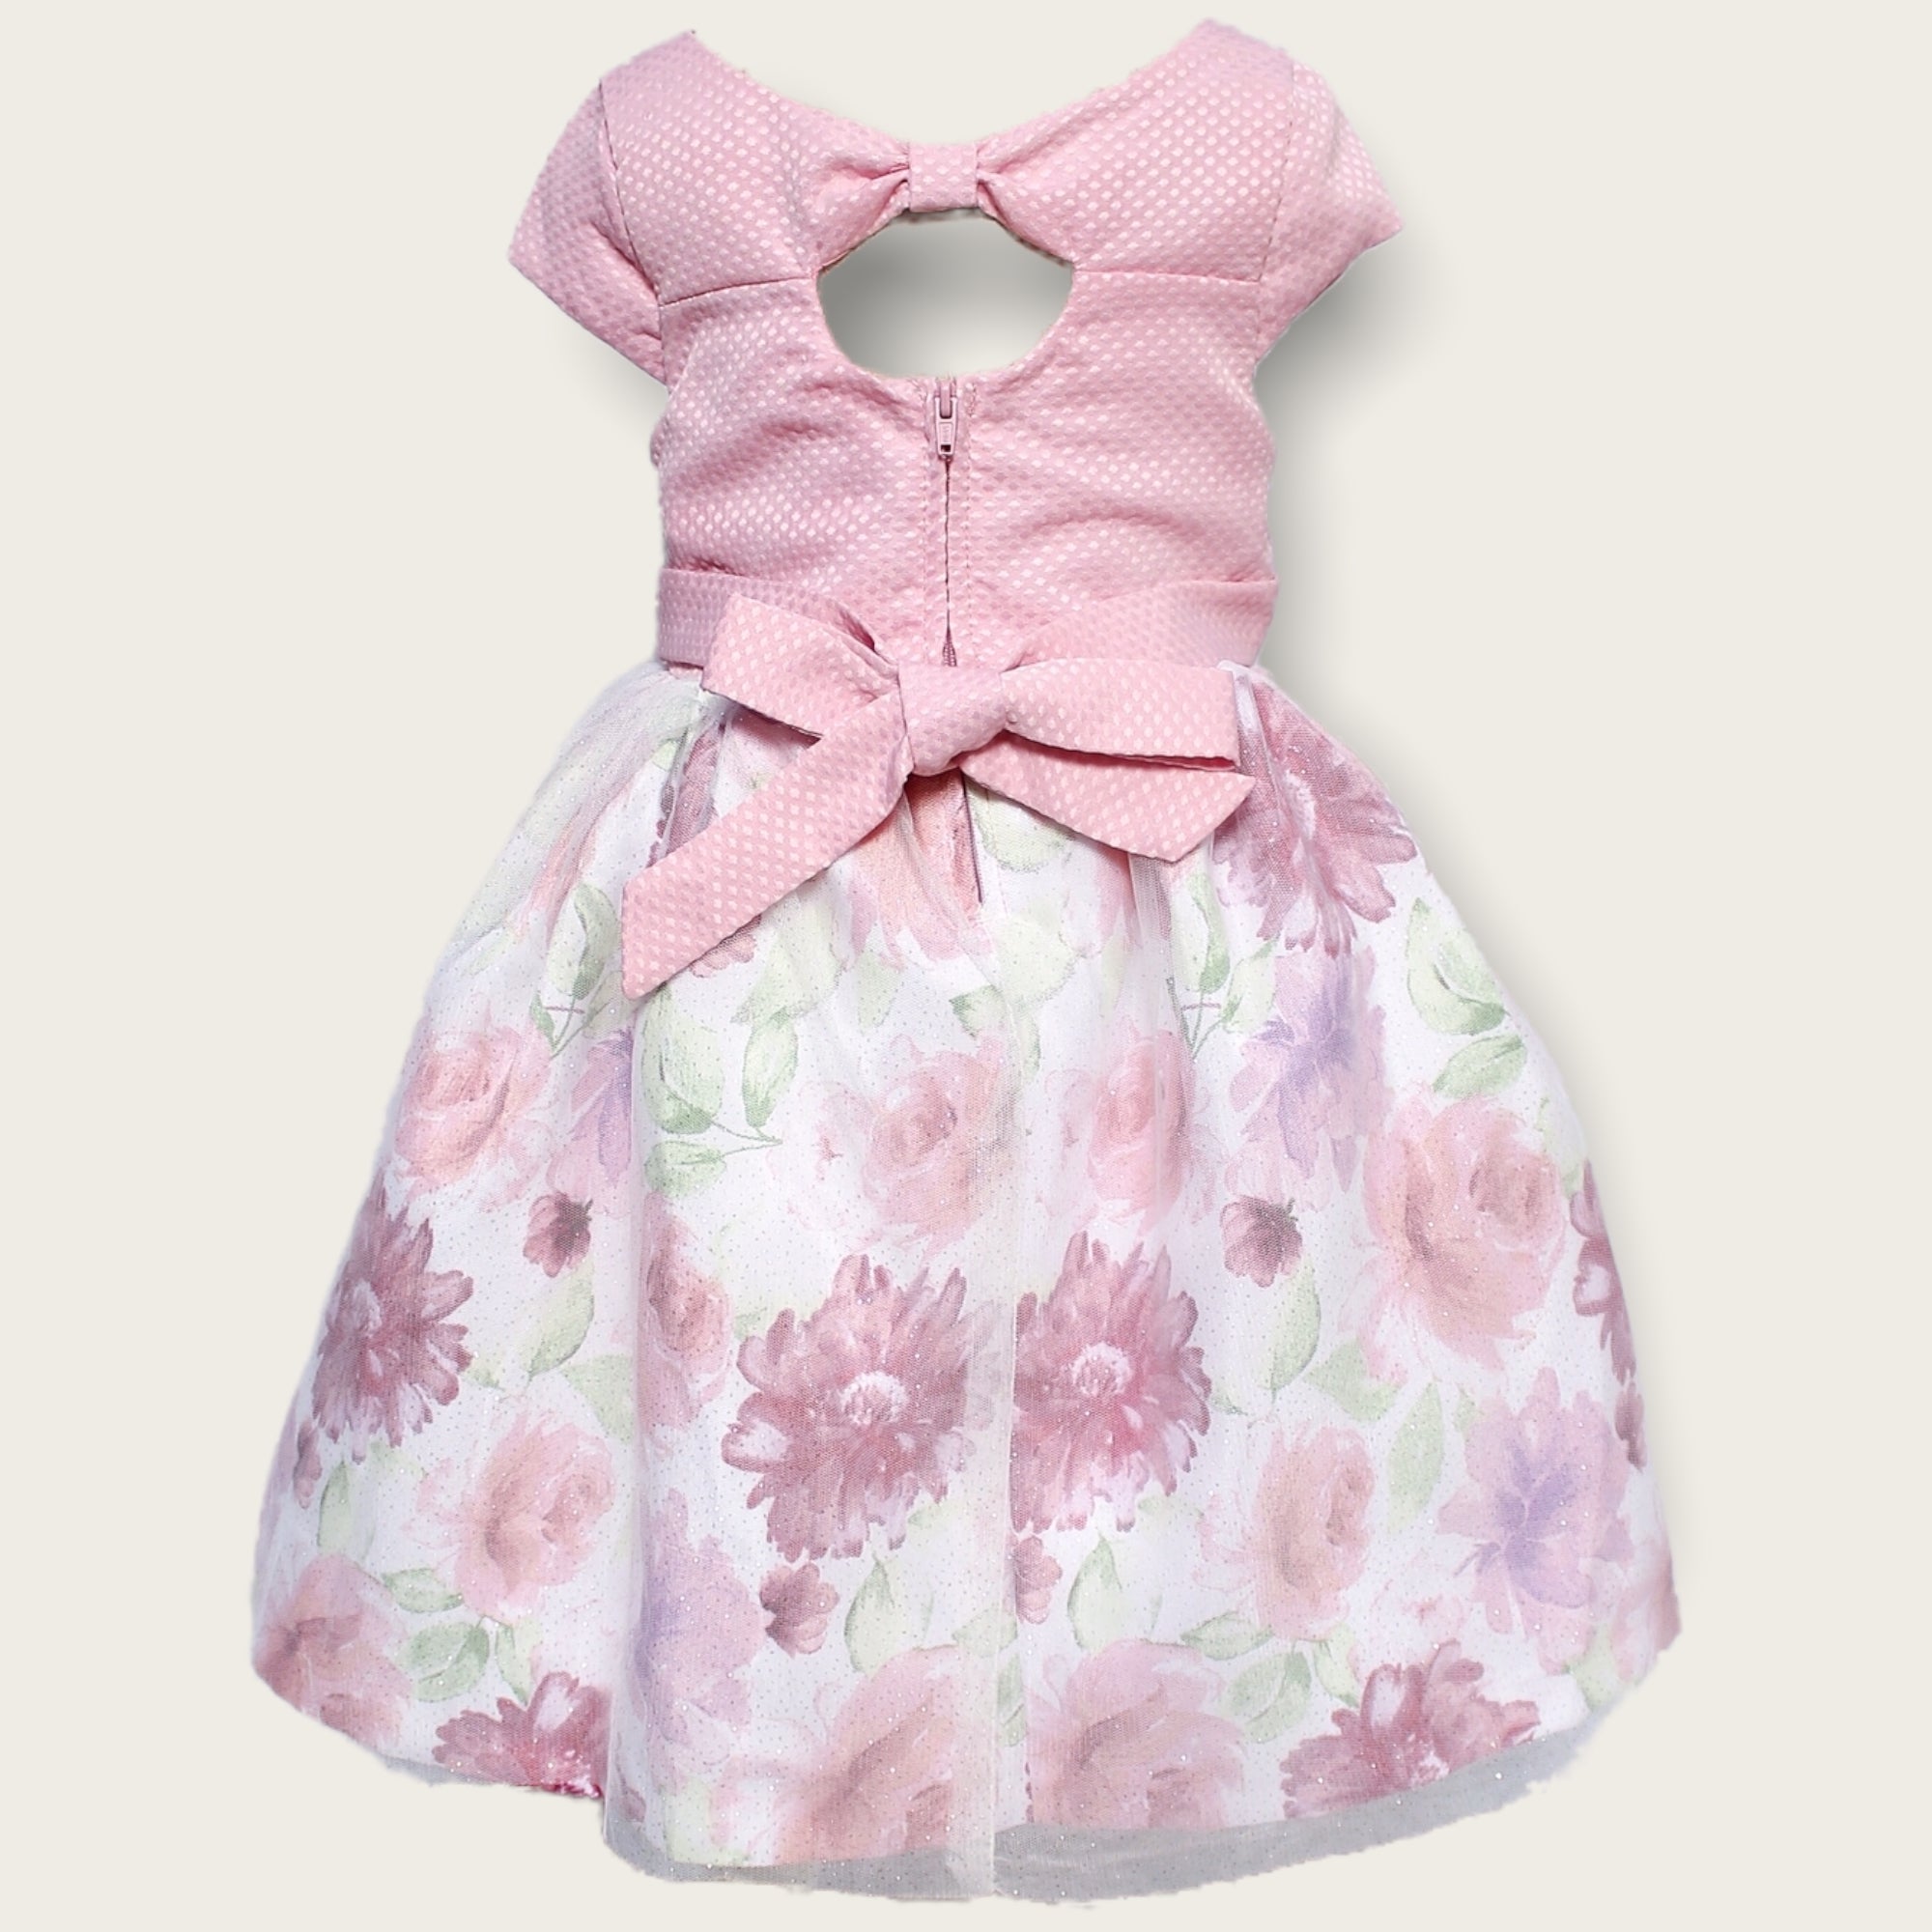 Nannette Kids Dress with Solid Bodice and Printed Floral Skirt with Tulle Overlay